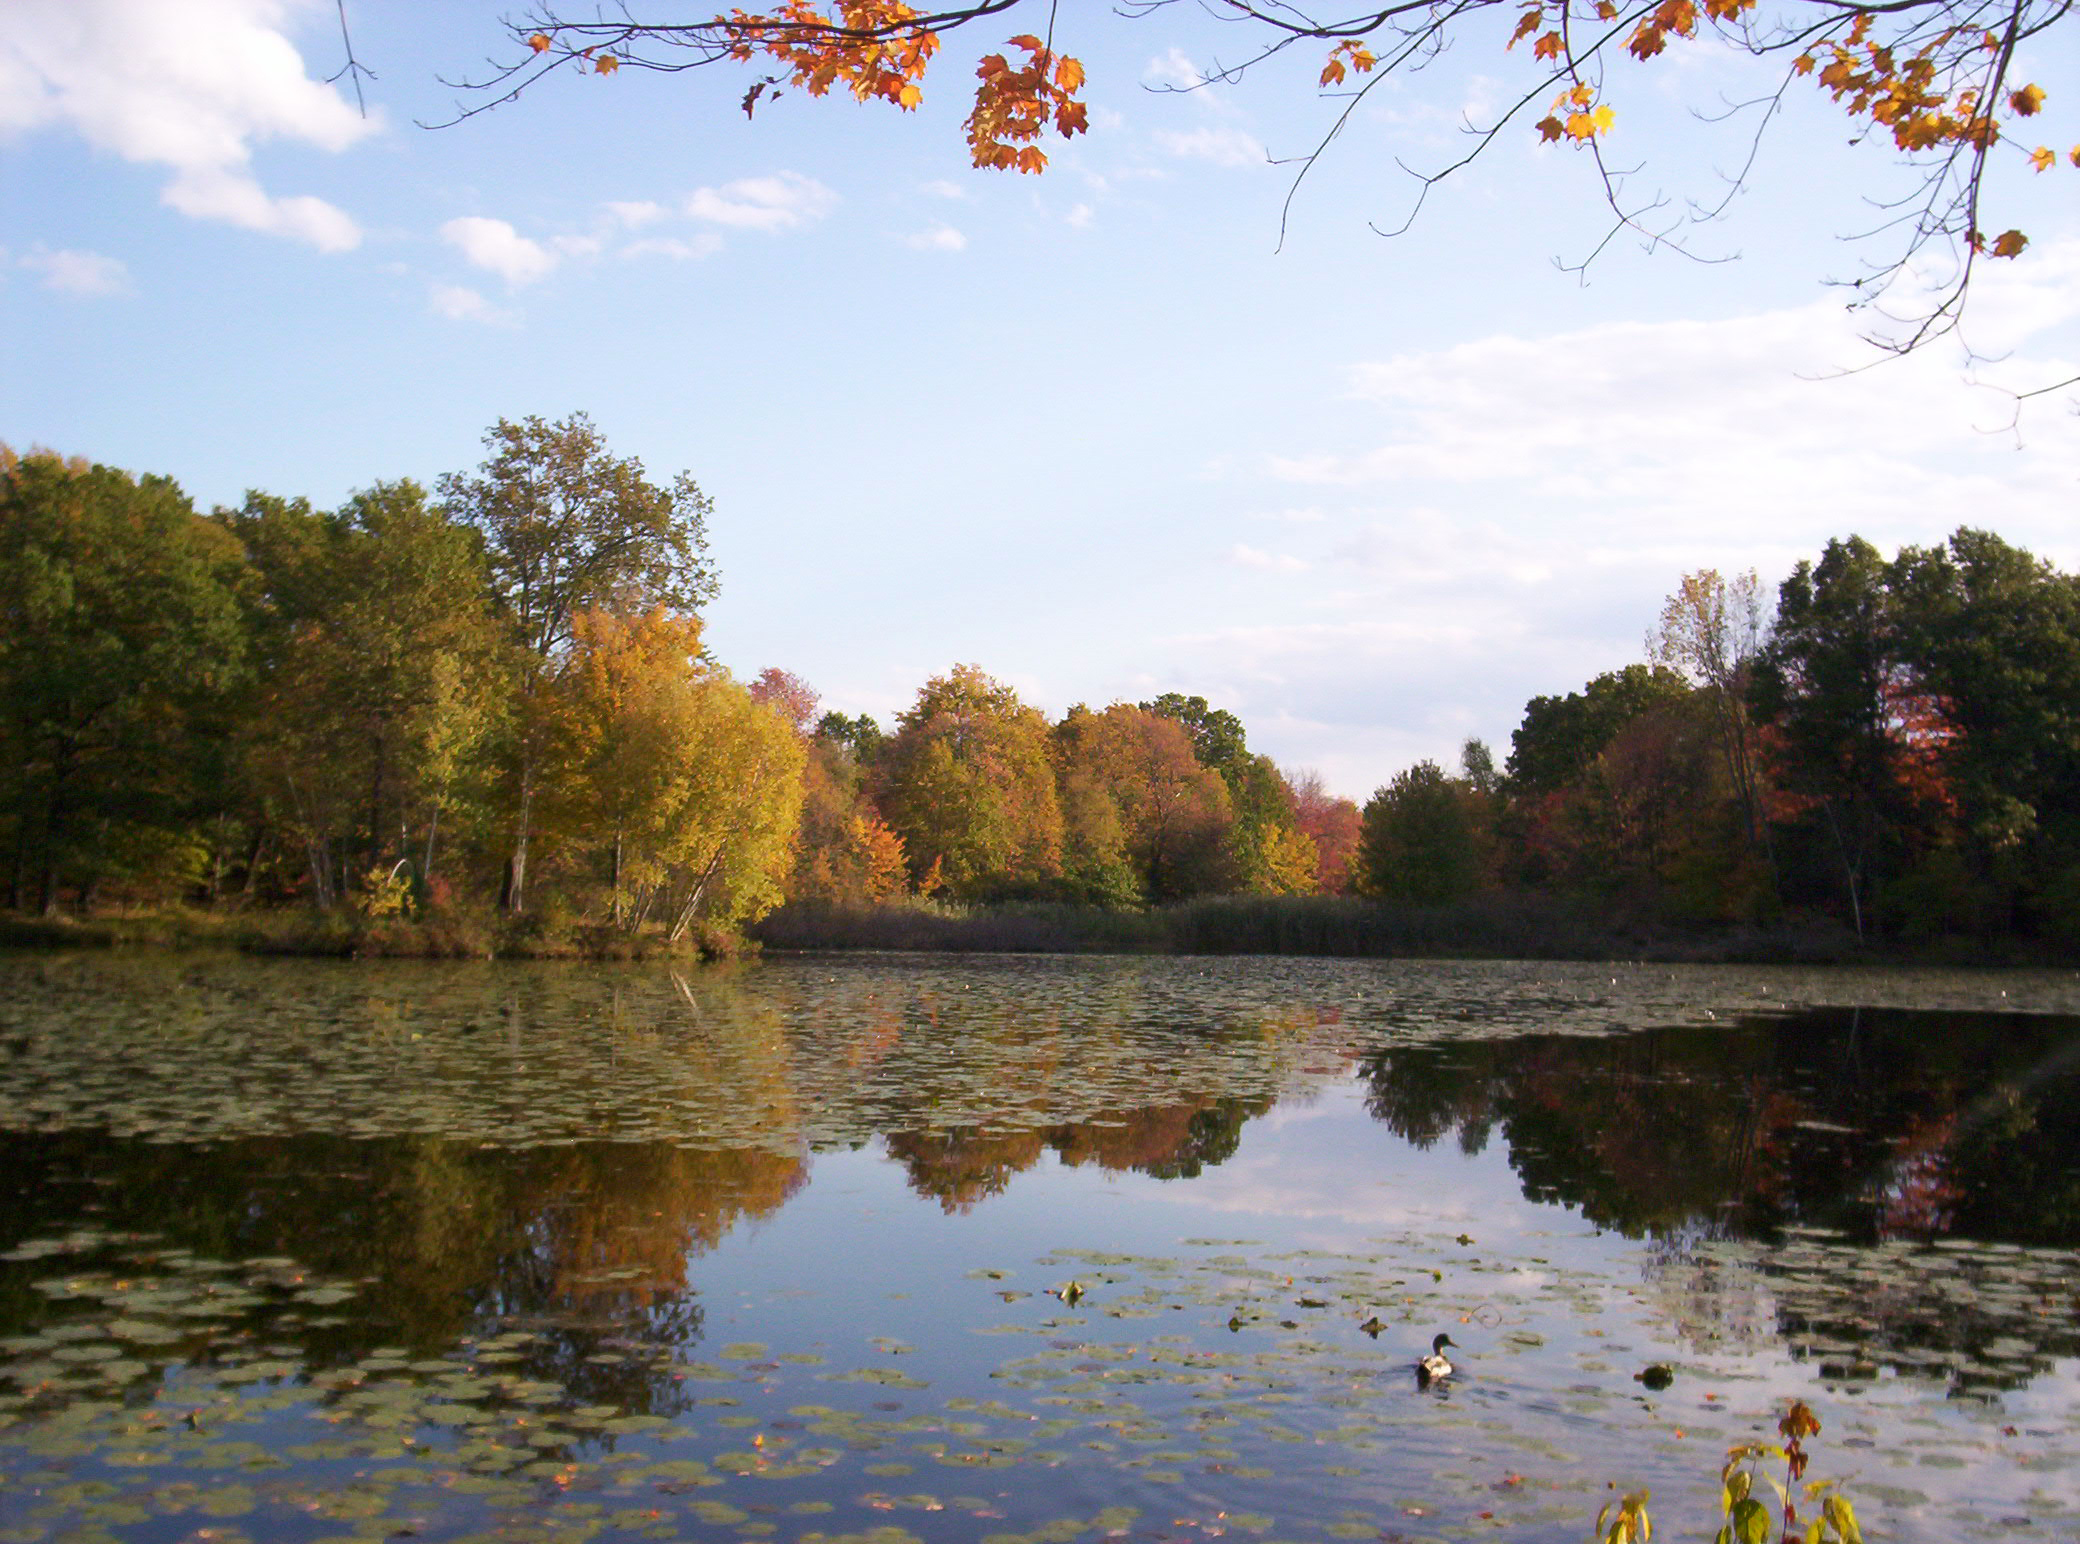 Lake Foliage (user submitted)